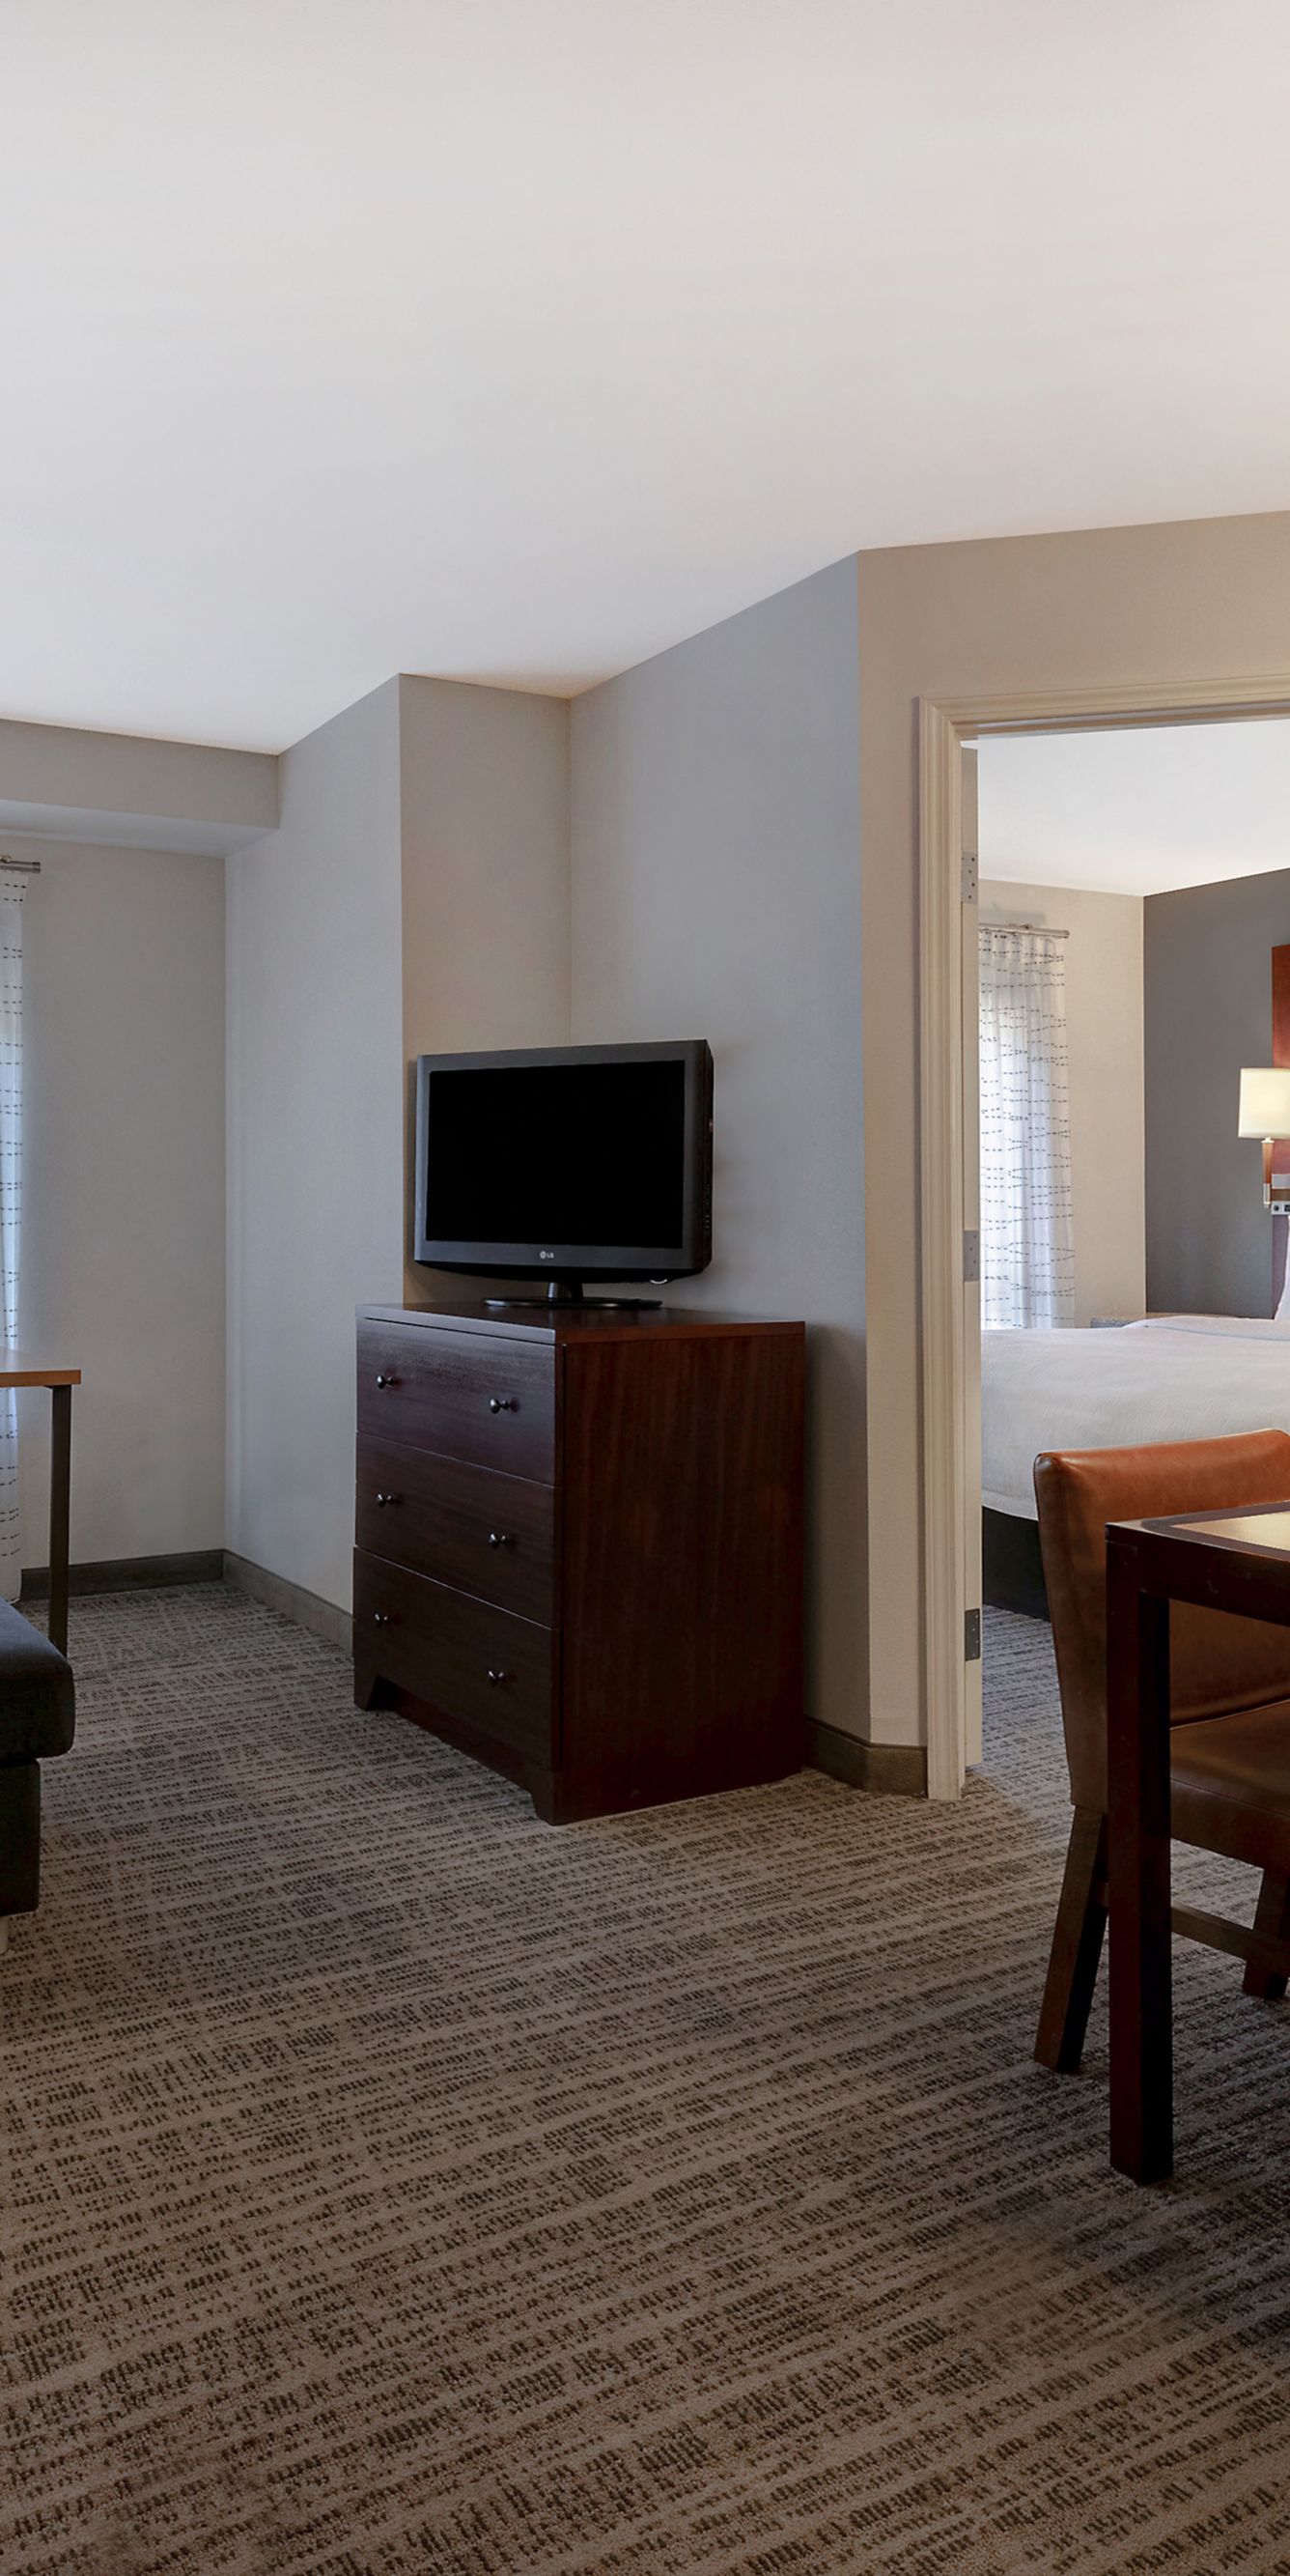 5 Ways to Enjoy the Suite Life at Hotel Colorado - Glenwood Springs